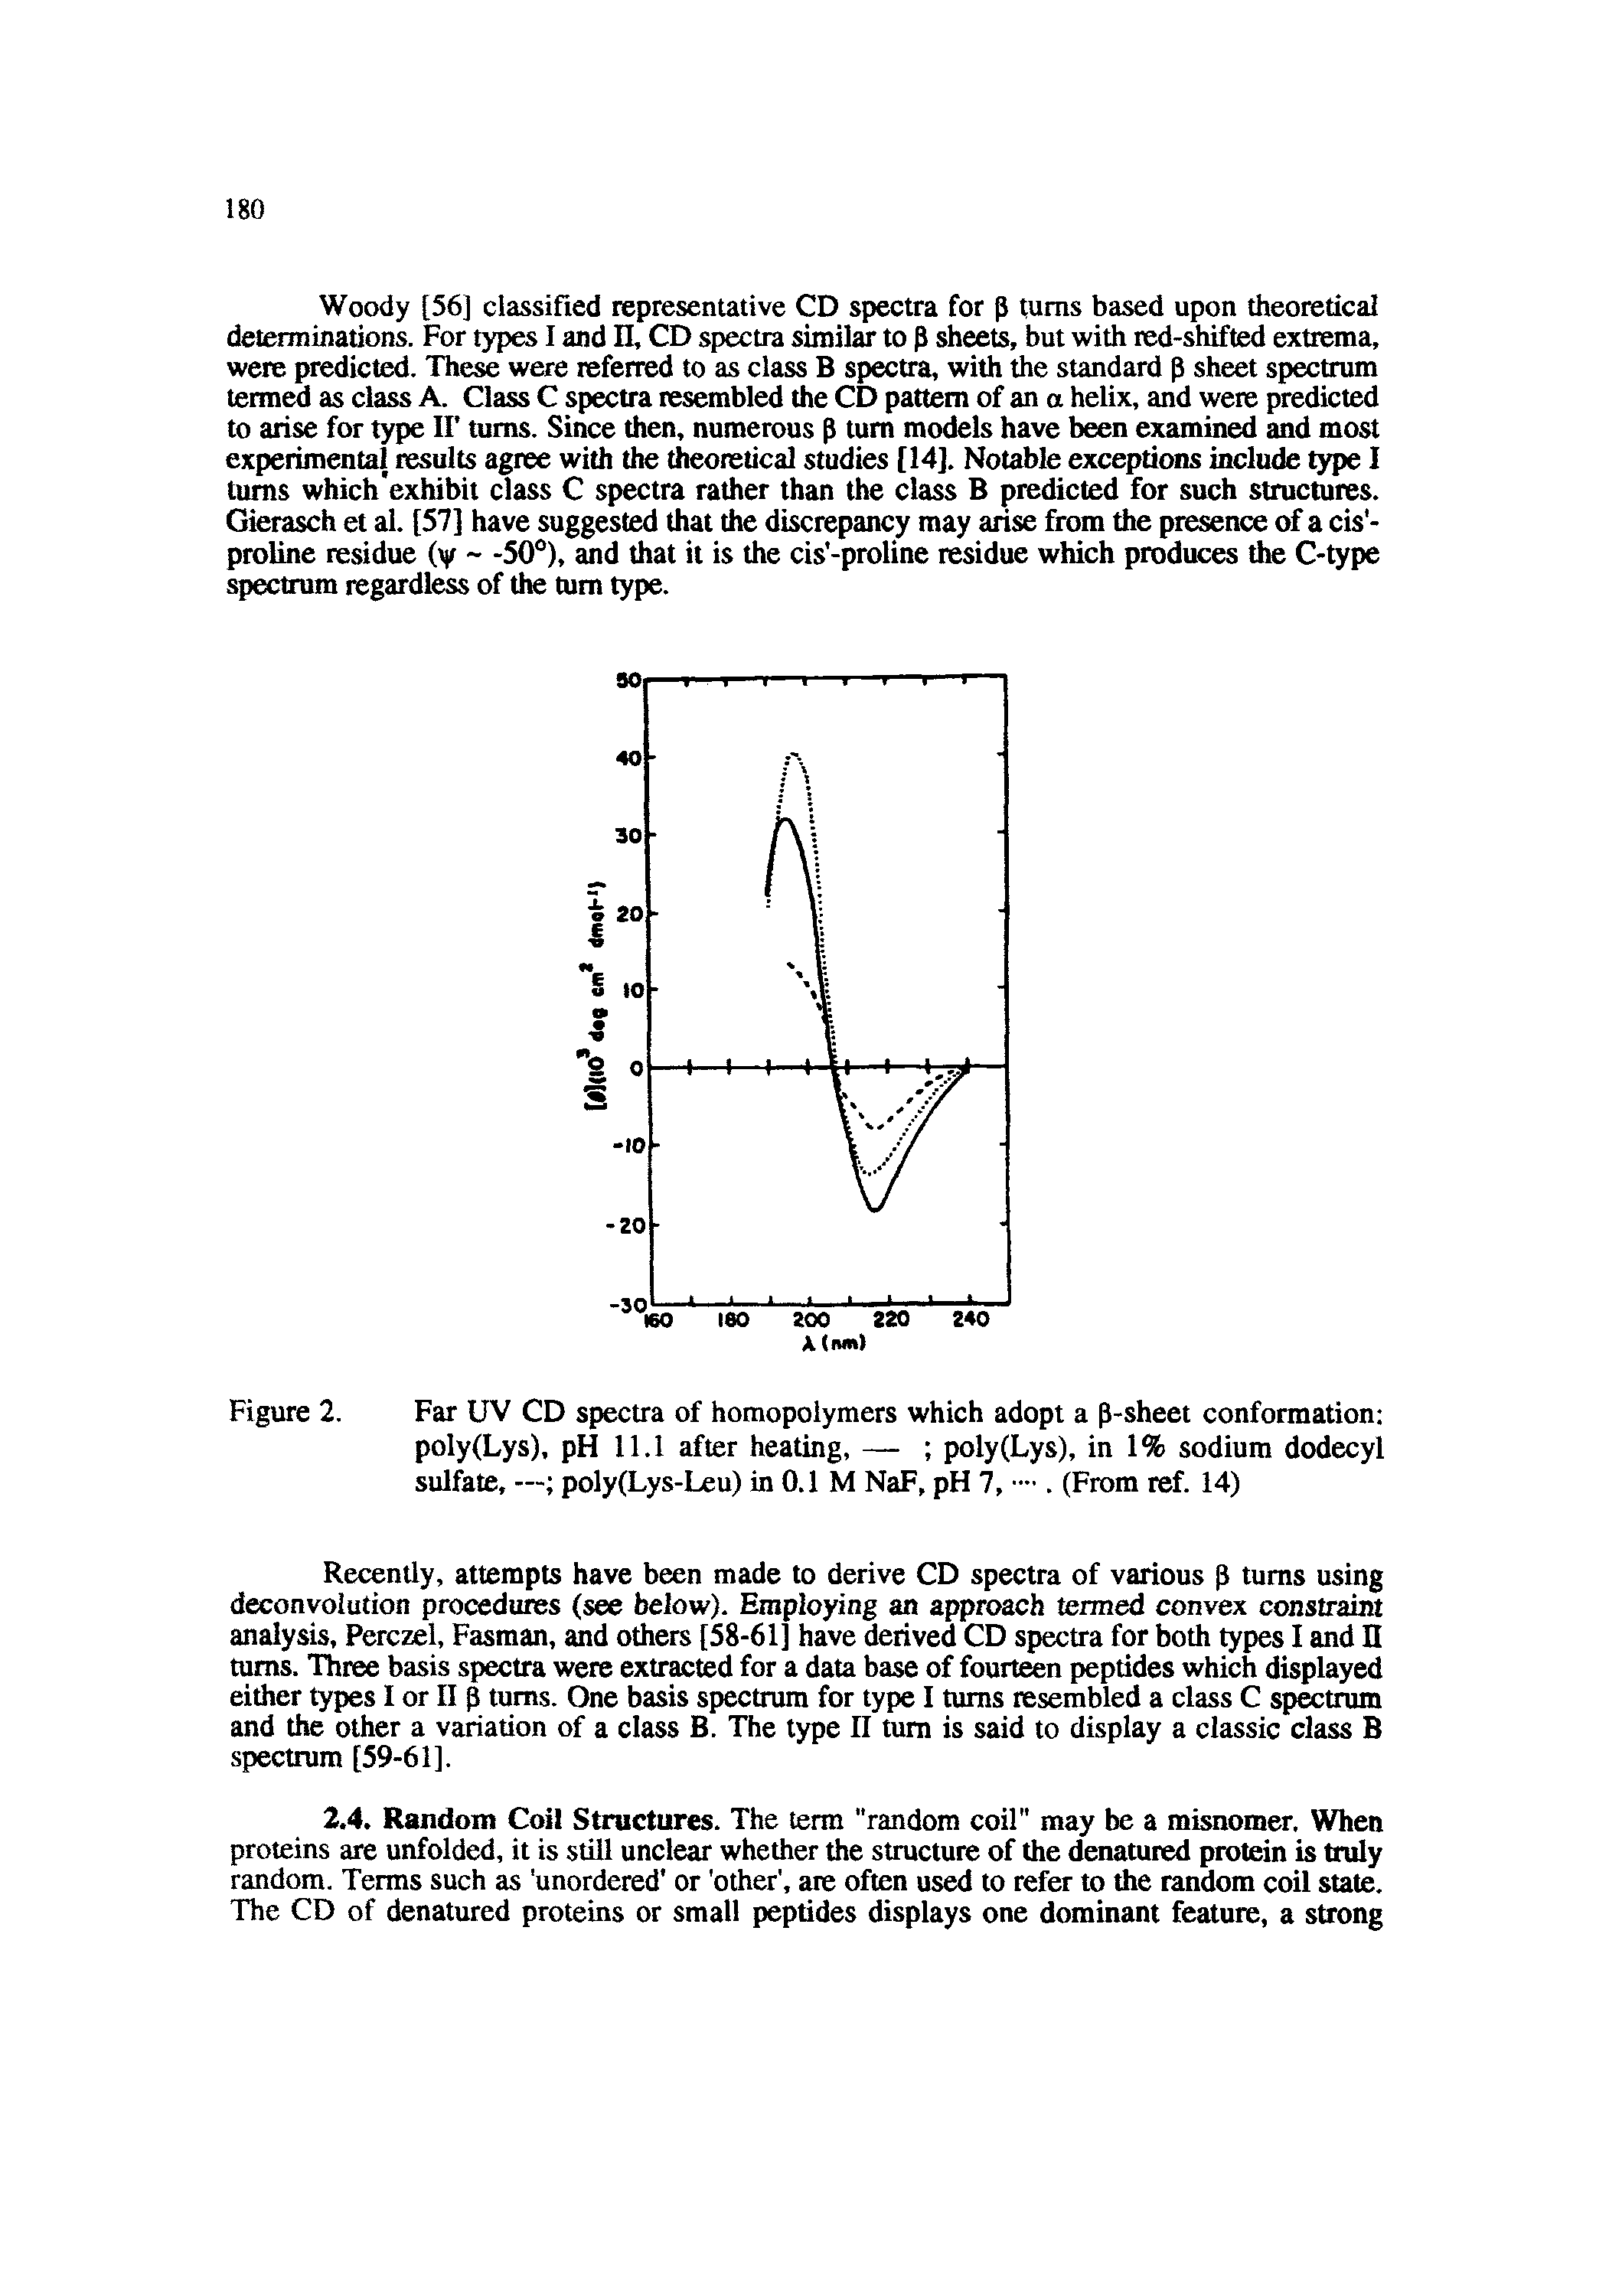 Figure 2. Far UV CD spectra of homopolymers which adopt a p-sheet conformation poly(Lys), pH 11.1 after heating, — poly(Lys), in 1% sodium dodecyl sulfate, — poly(Lys-Leu) in 0.1 M NaF, pH 7, . (From ref. 14)...